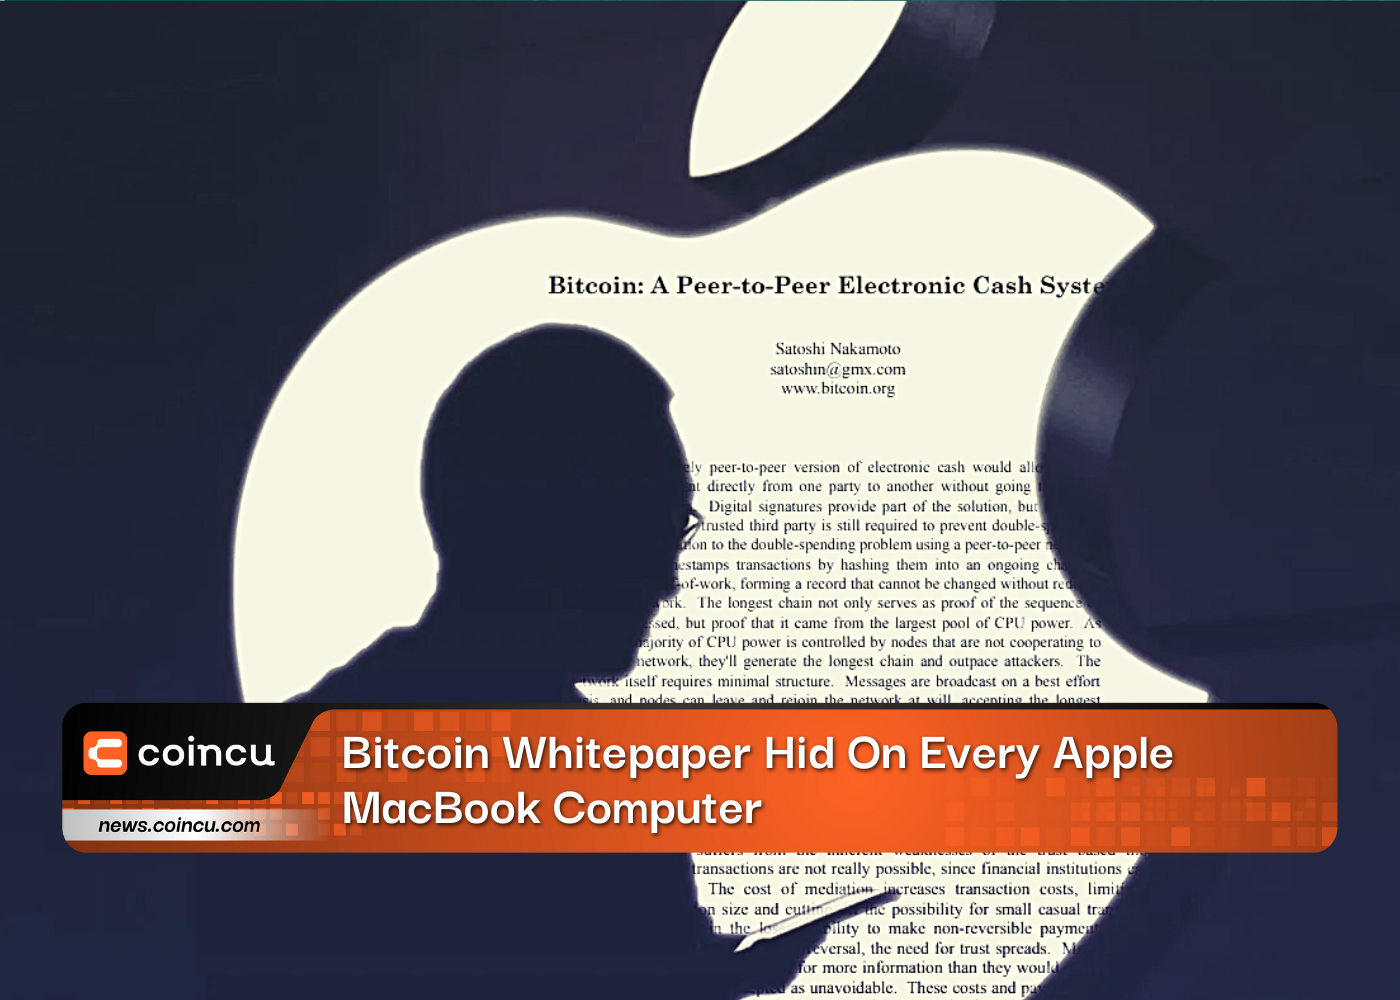 Bitcoin Whitepaper Hid On Every Apple MacBook Computer